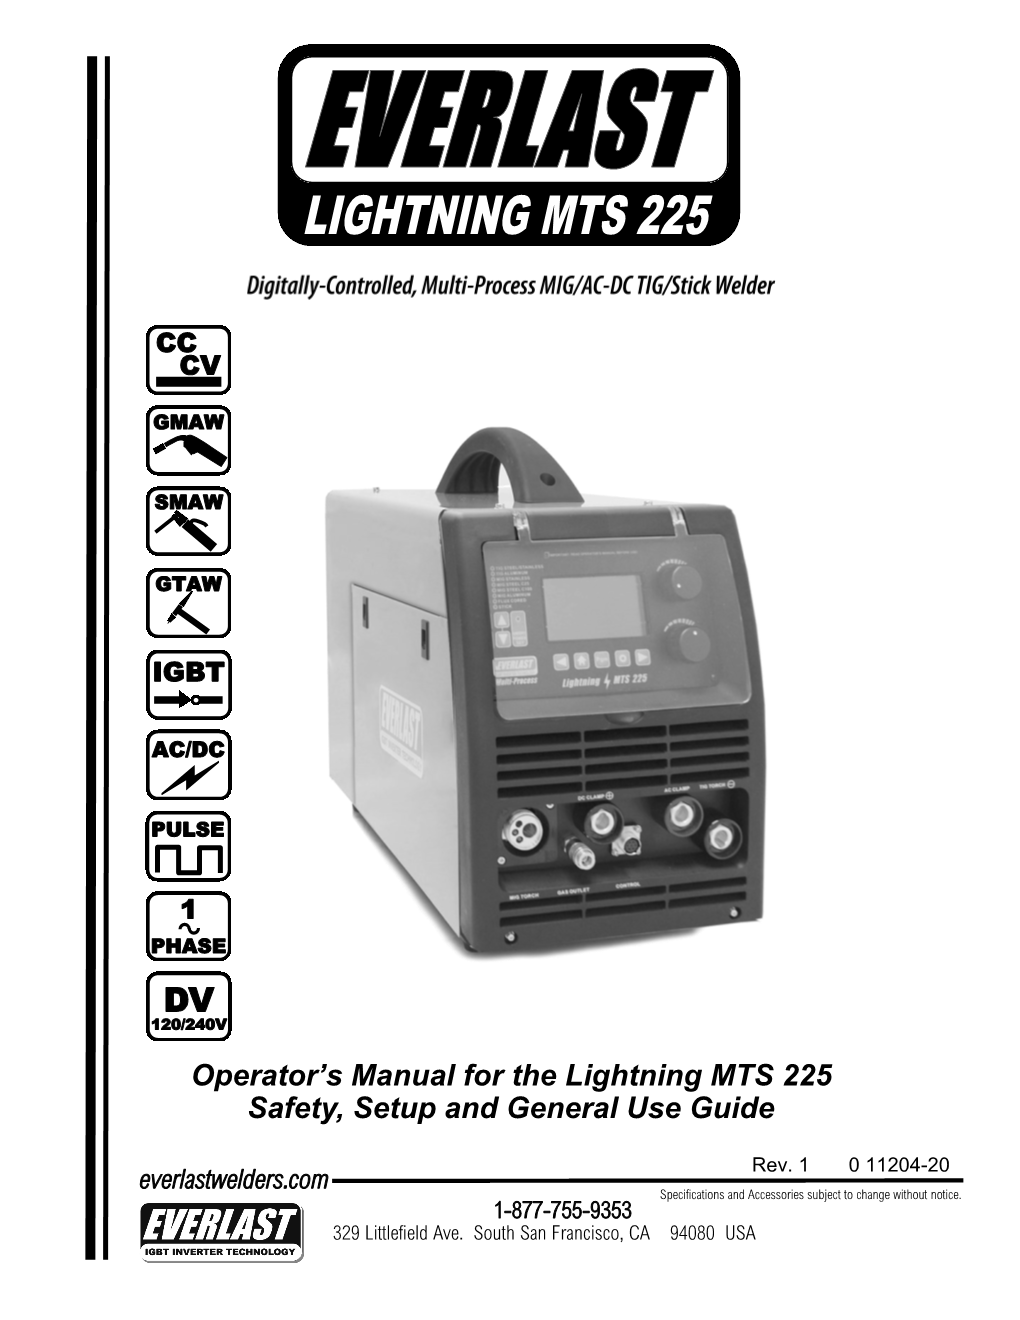 Operator's Manual for the Lightning MTS 225 Safety, Setup and General